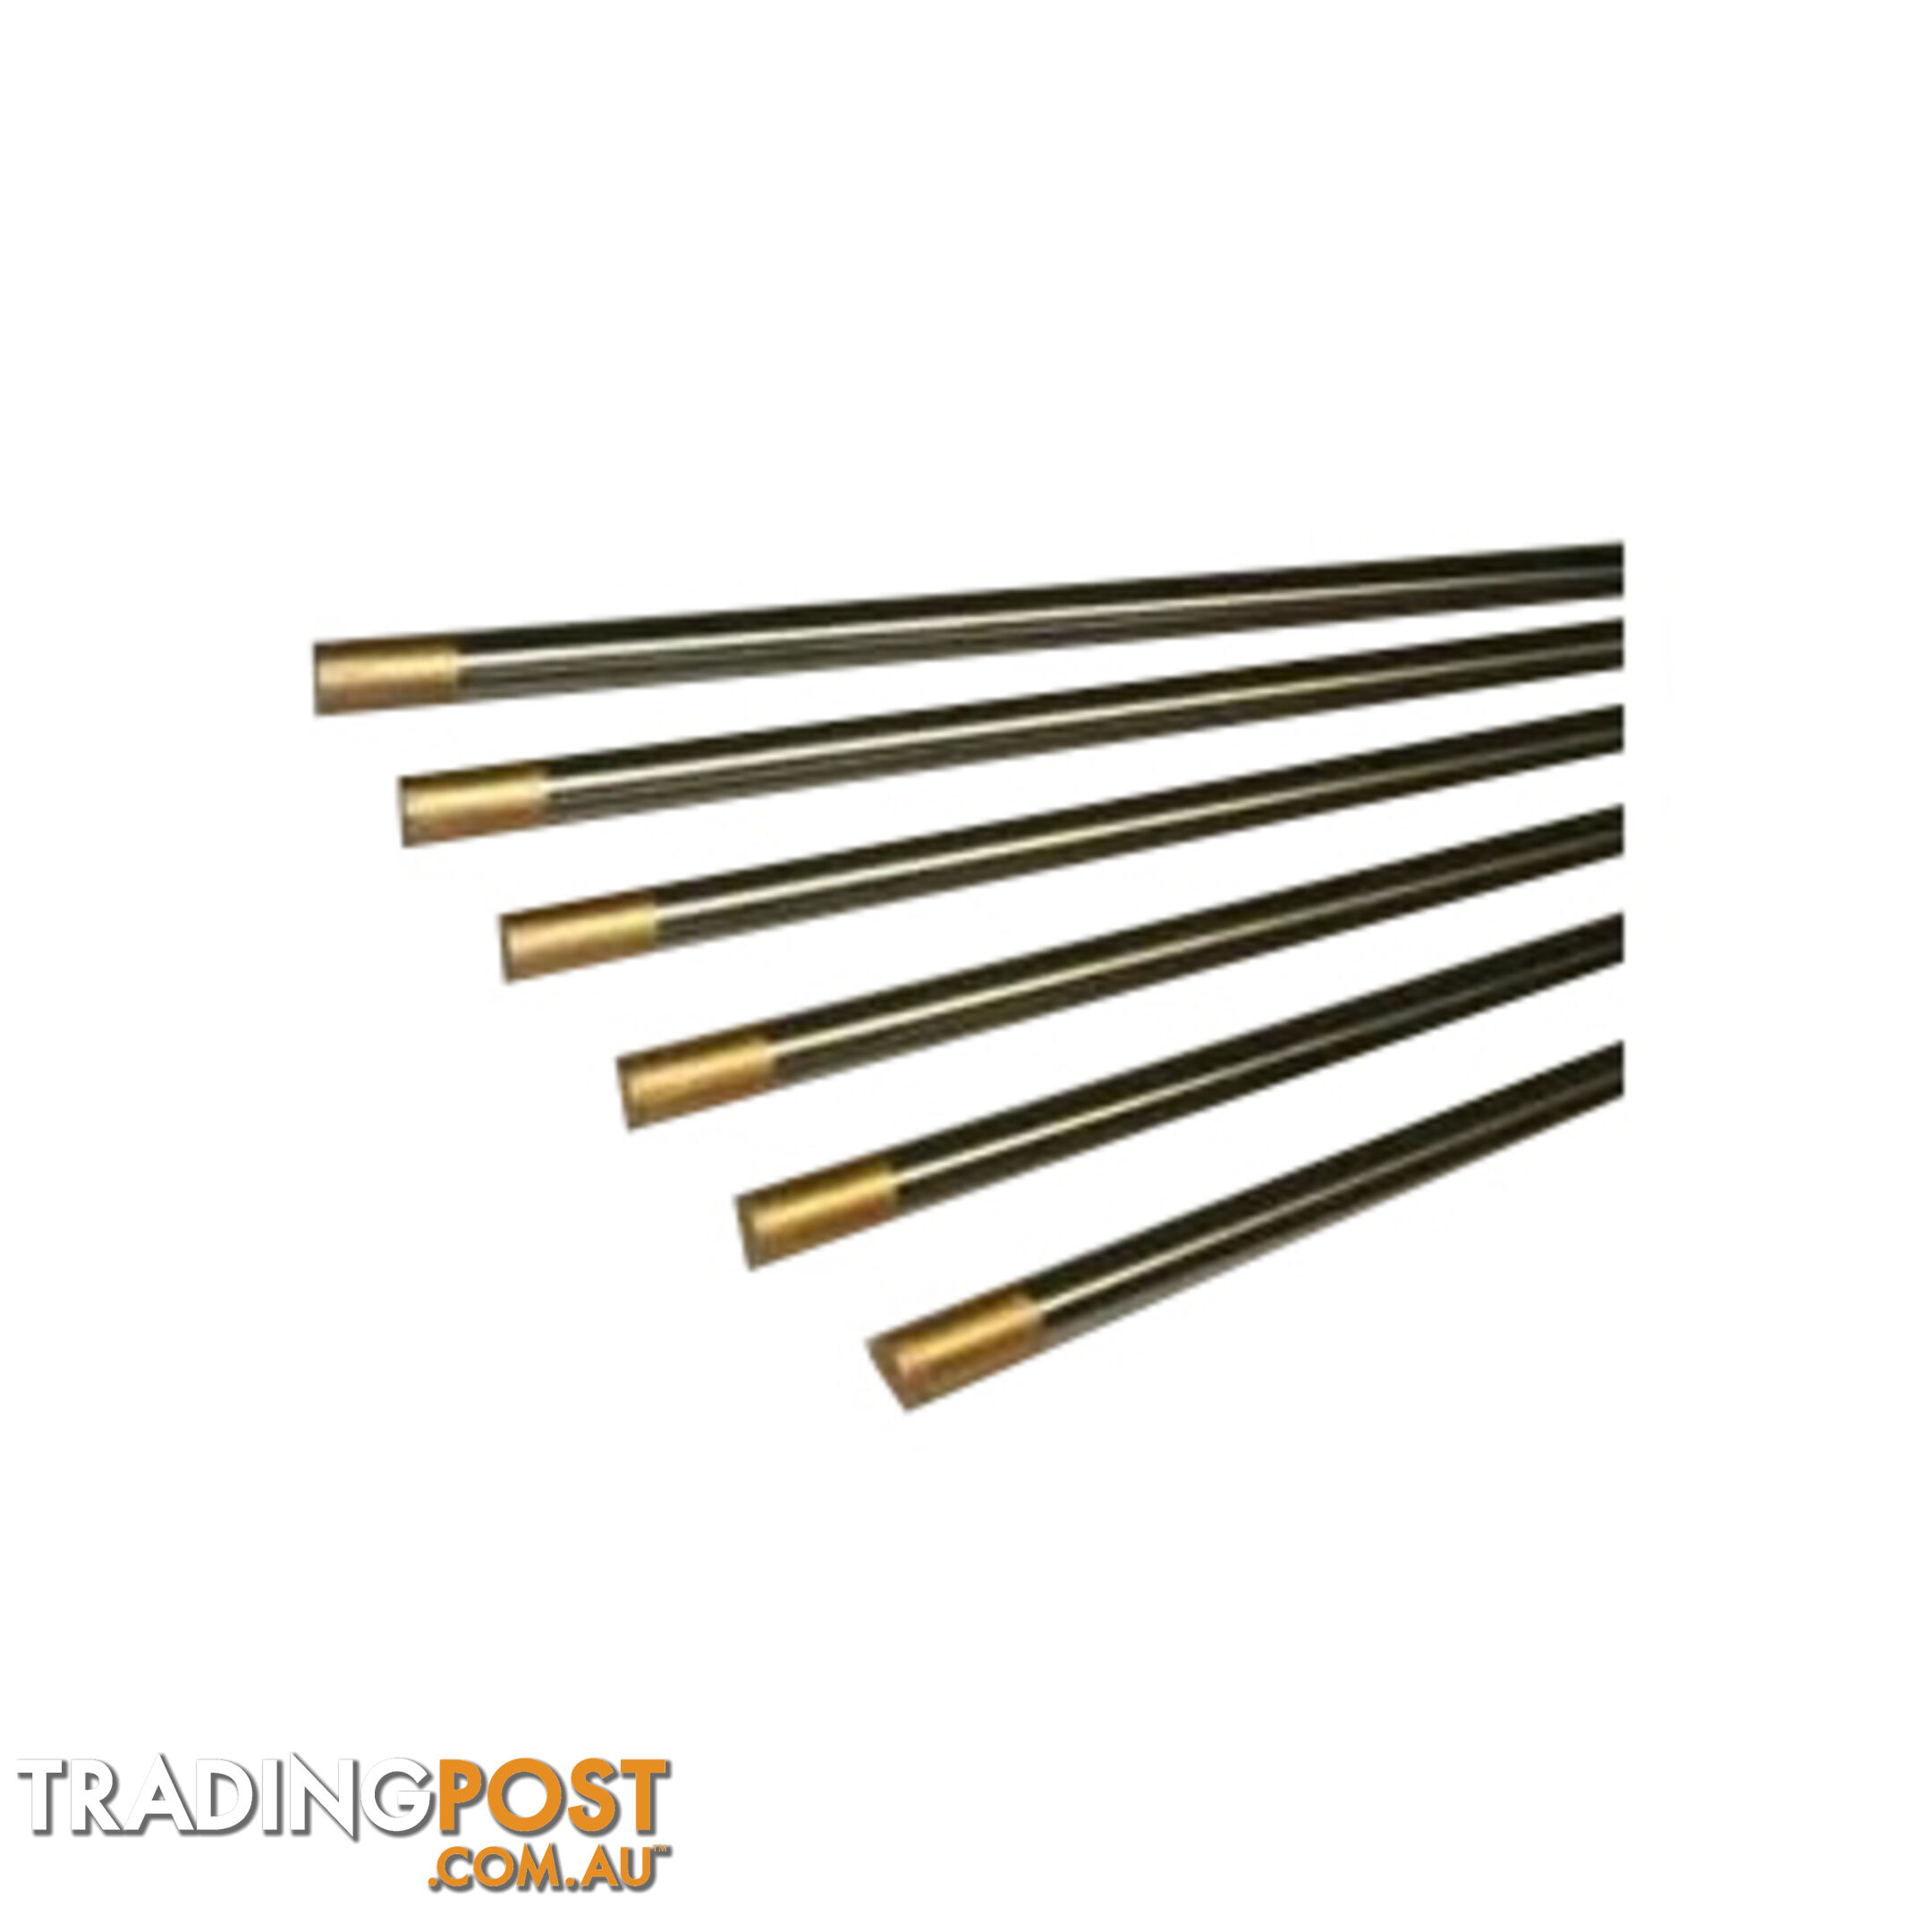 3.2mm 1.5% Lanthanated Tig Tungsten Electrode Pack of 10